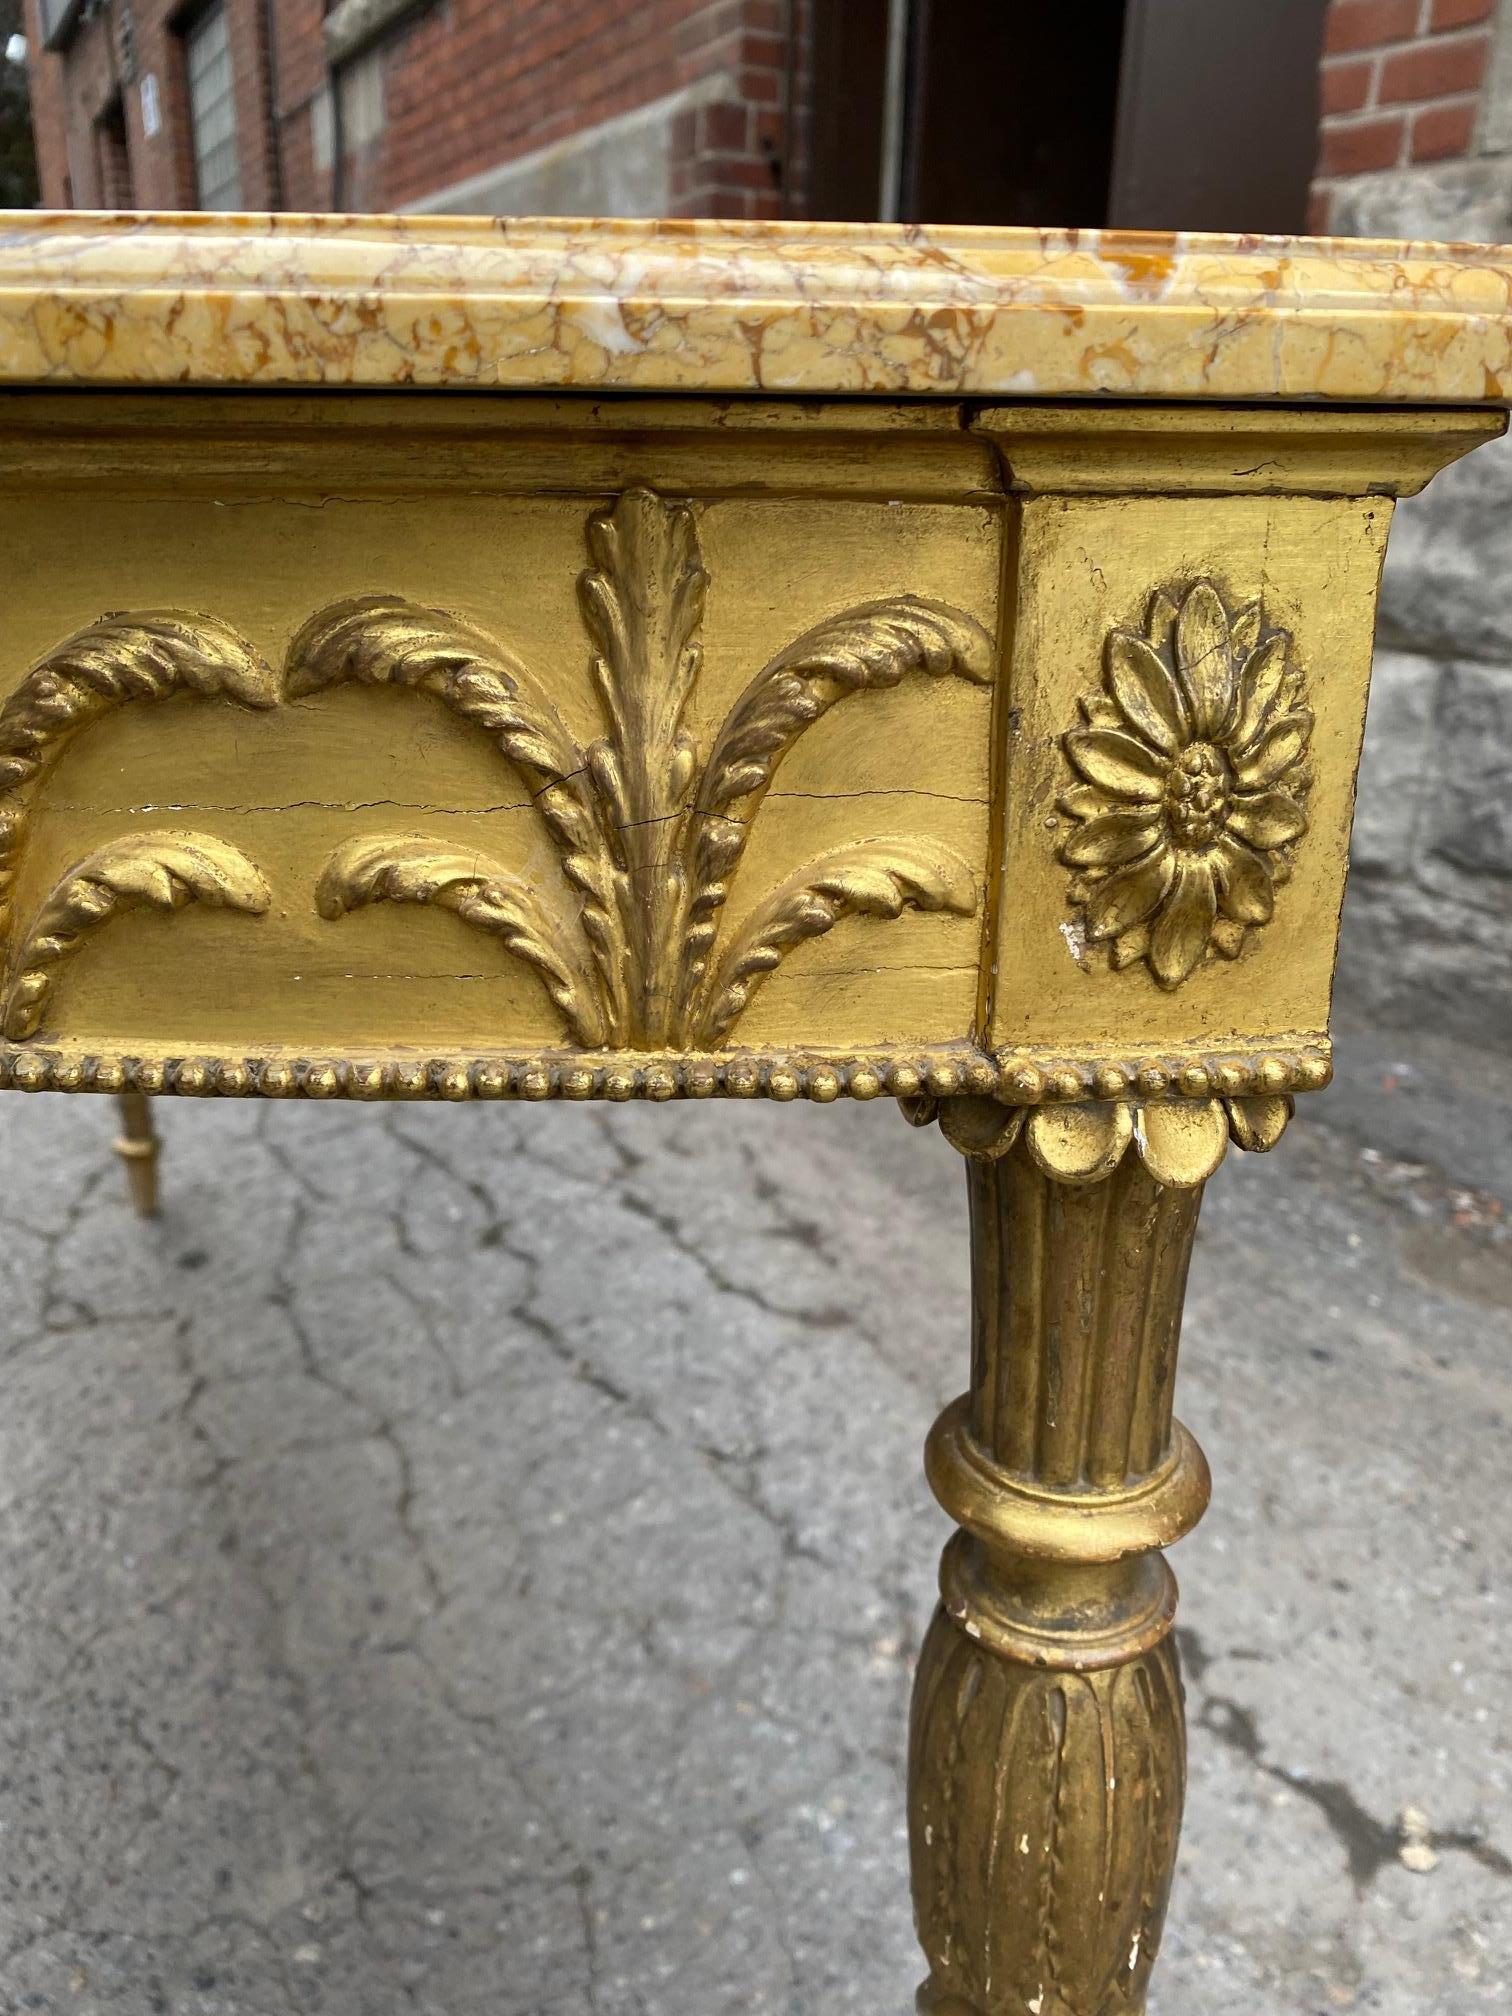 Late 18th Century Rare Giltwood Adam Period Demi Lune Console Table with Sienna Marble Top For Sale